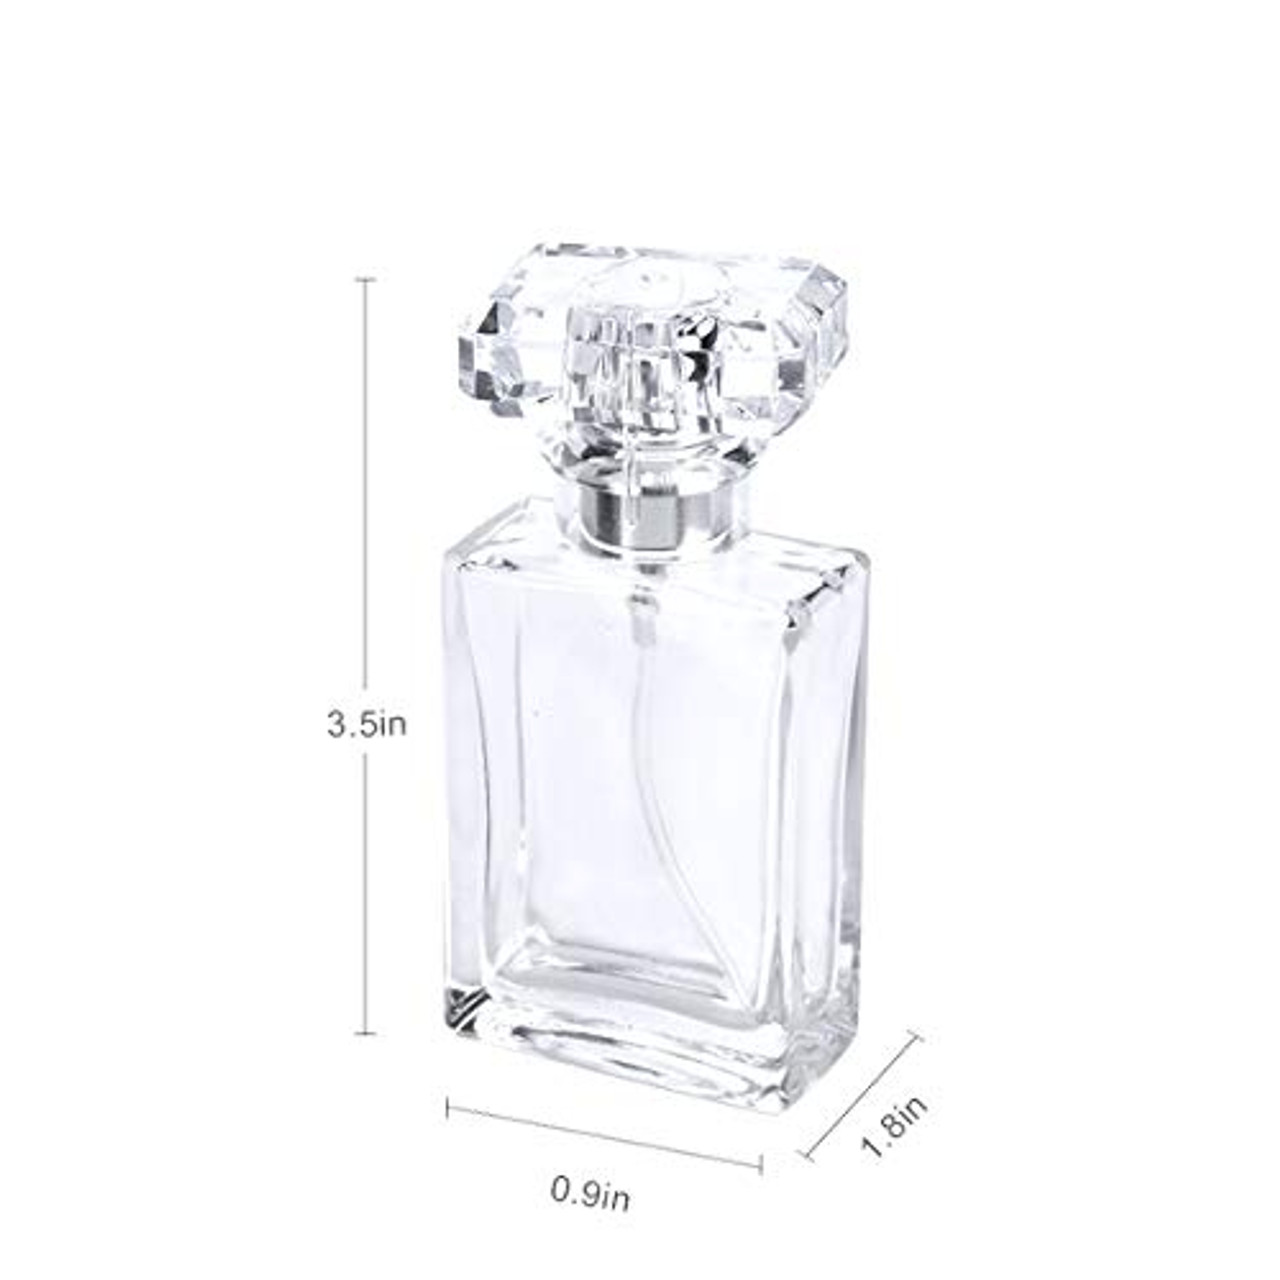 ConStore 2pcs 100ml Square Grids Carved Perfume Bottles Clear Glass spray  bottle Empty Refillable fi…See more ConStore 2pcs 100ml Square Grids Carved